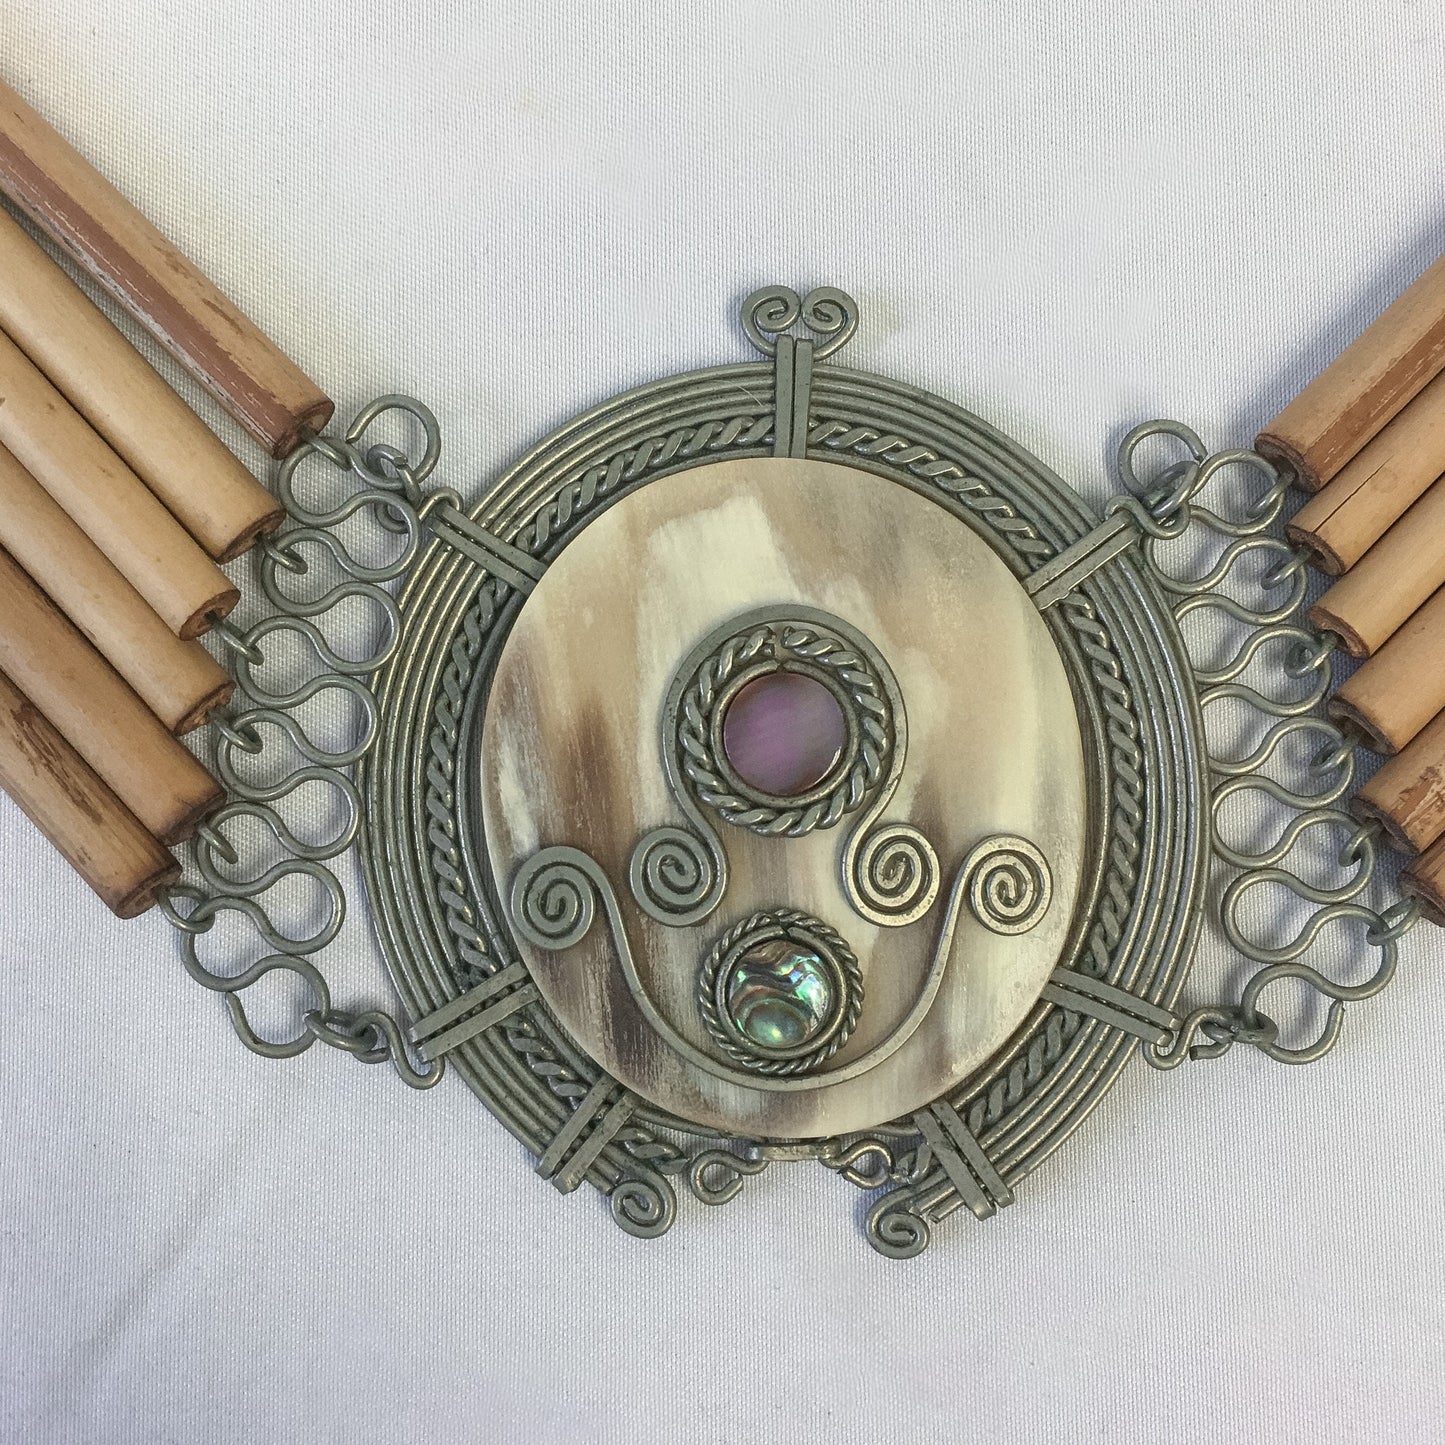 Vintage Handcrafted Wooden Cylindrical Belt with Silver Toned Metal and Stone Buckle, Boho Style Chain Belt